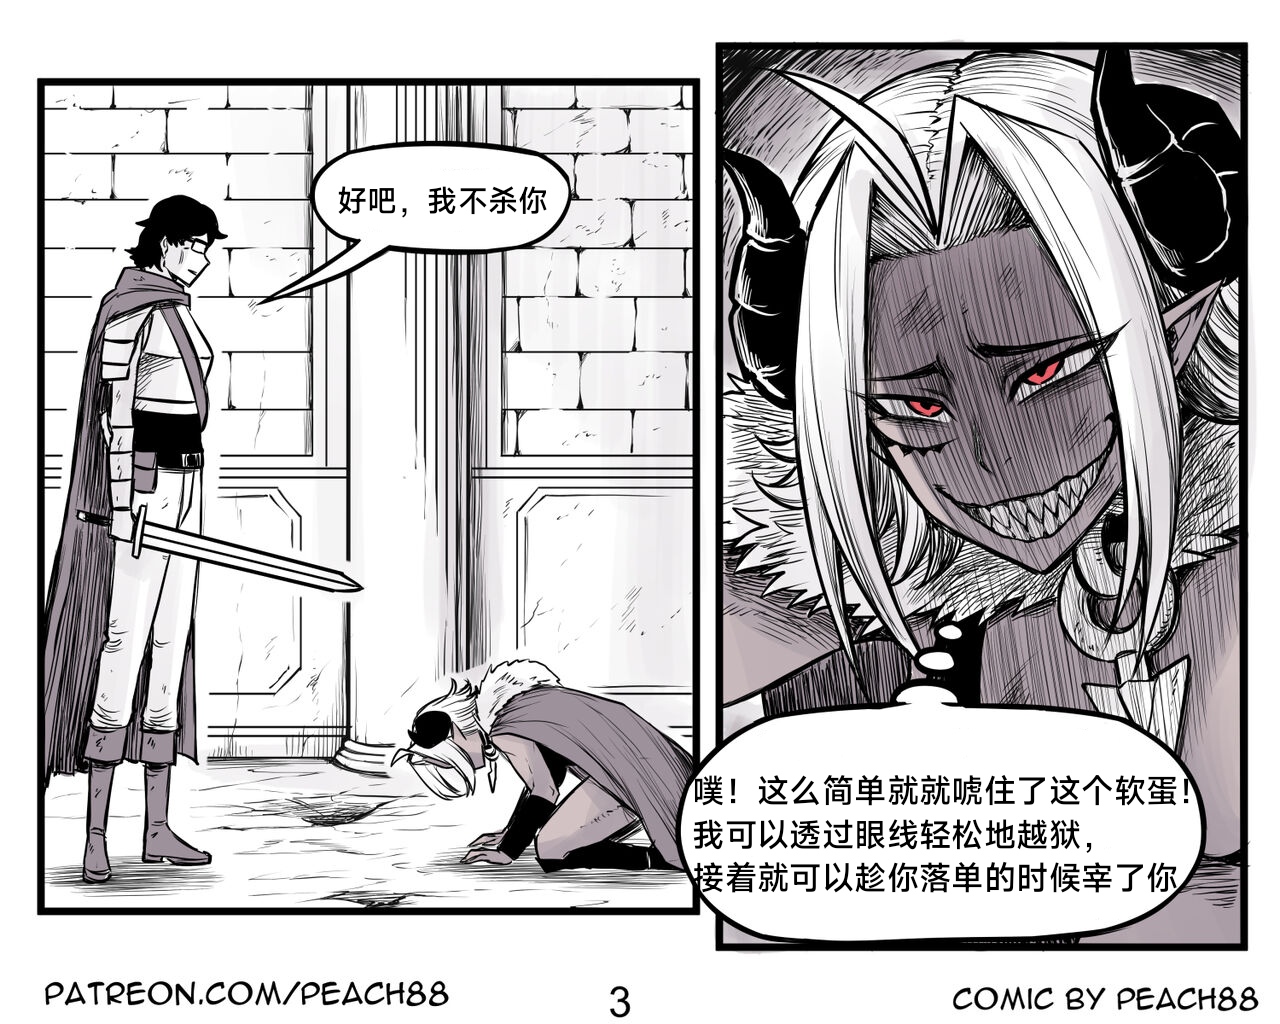 [PeaCh88] 魔王女朋友 Demon King GF ch1-8 (+Patreon extra) ［无机咖啡酸个人汉化］[Chinese][ongoing] - Page 4